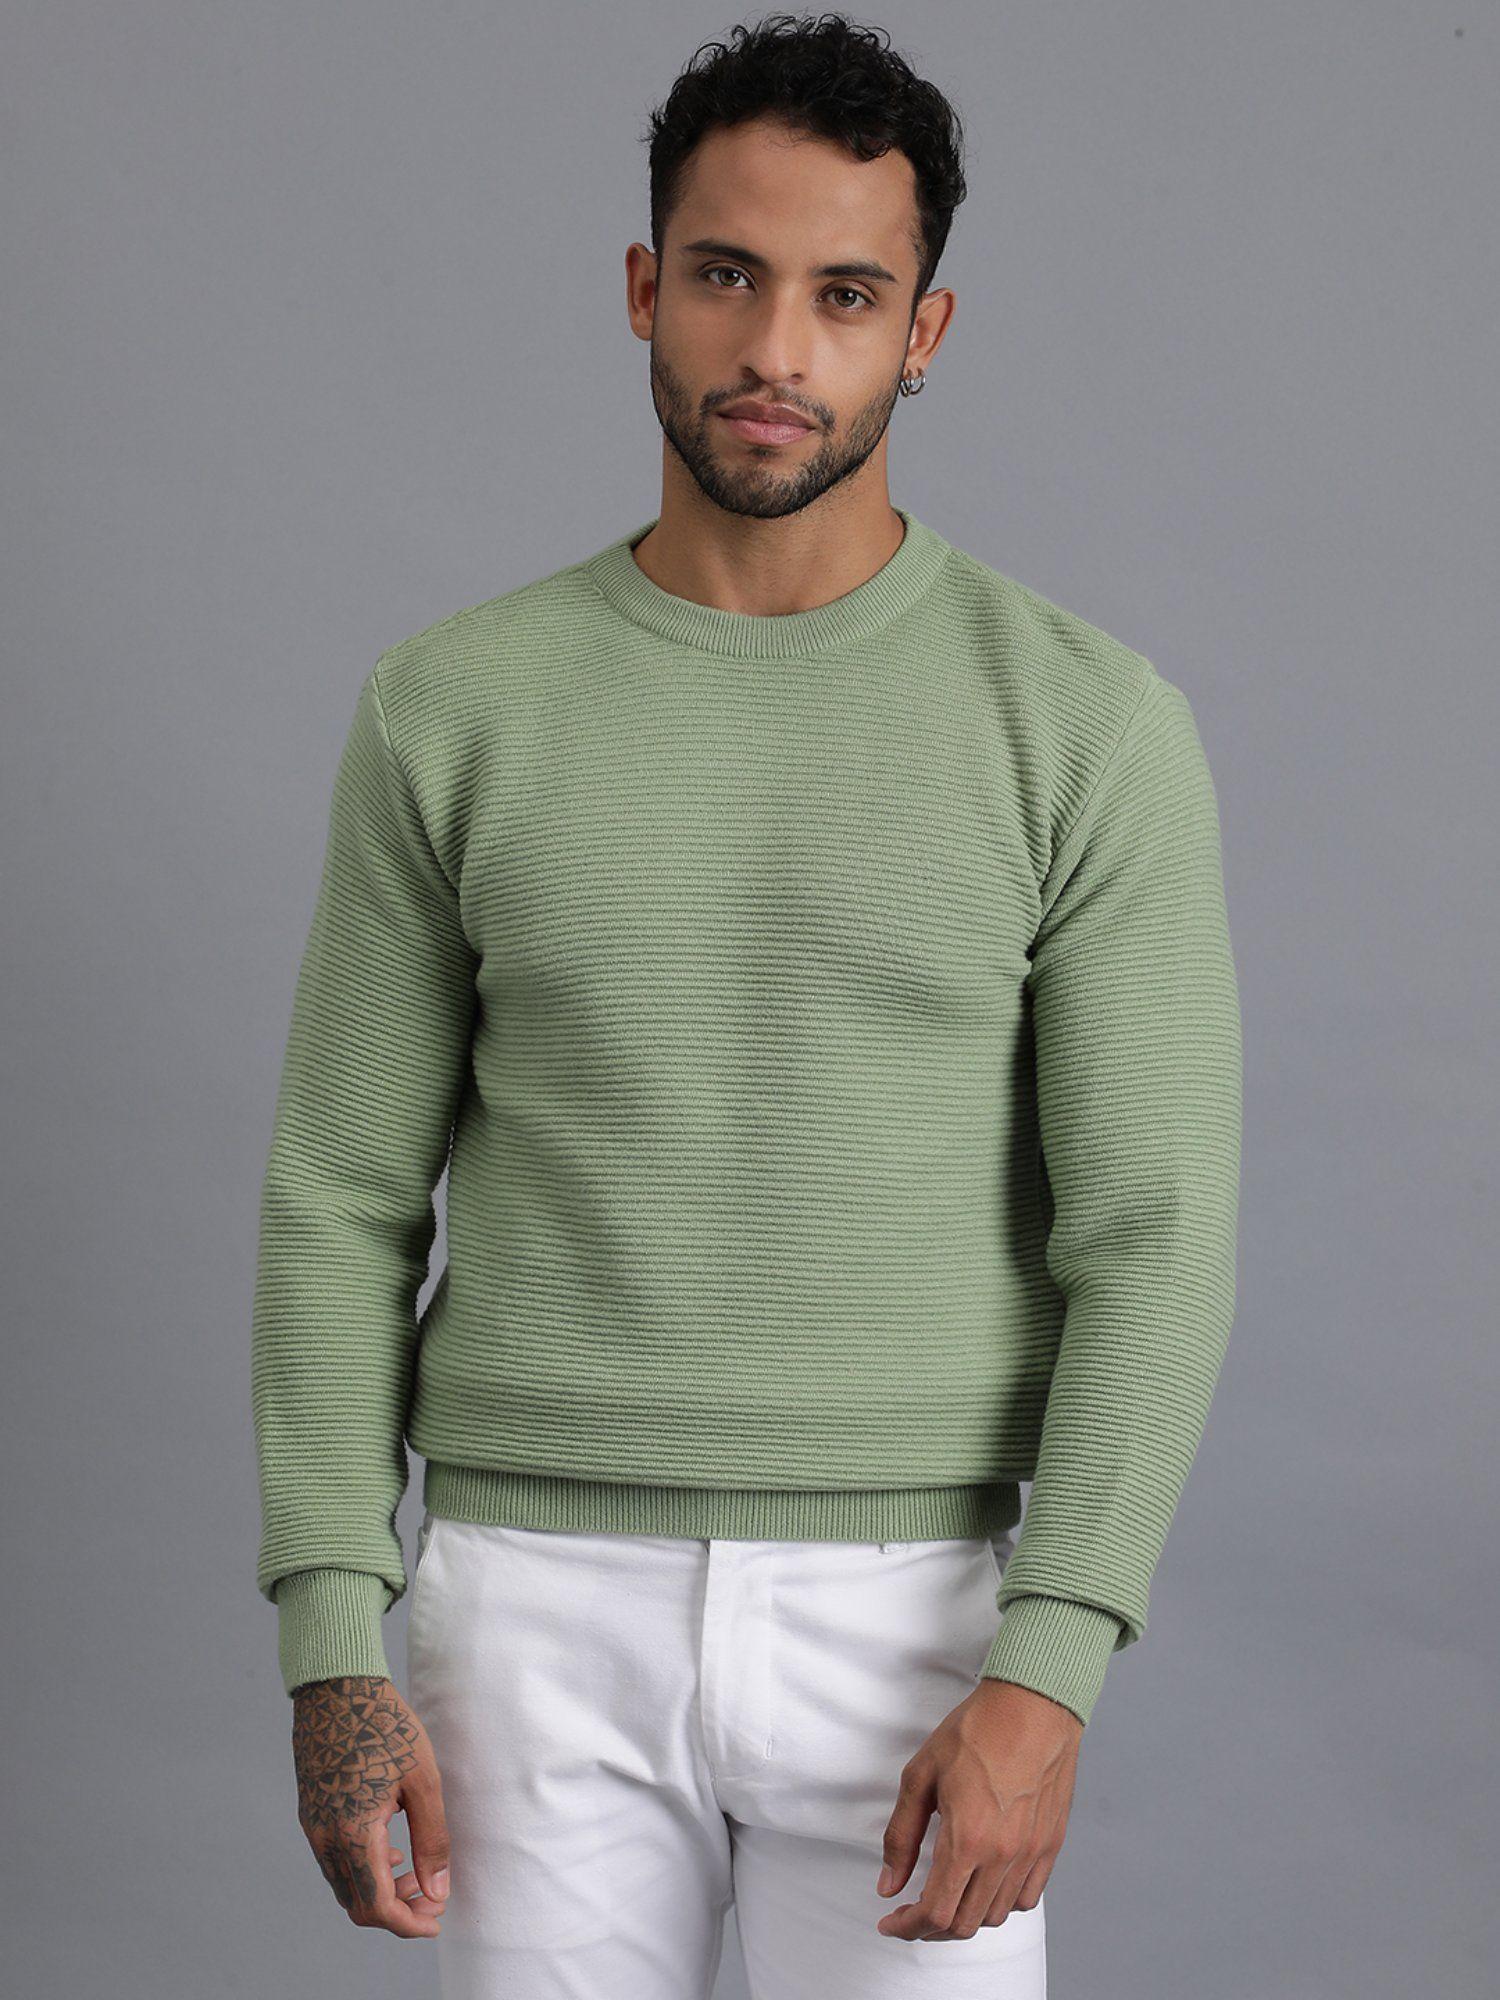 mint green luxury lateral designer knitted mens wool pullover sweater